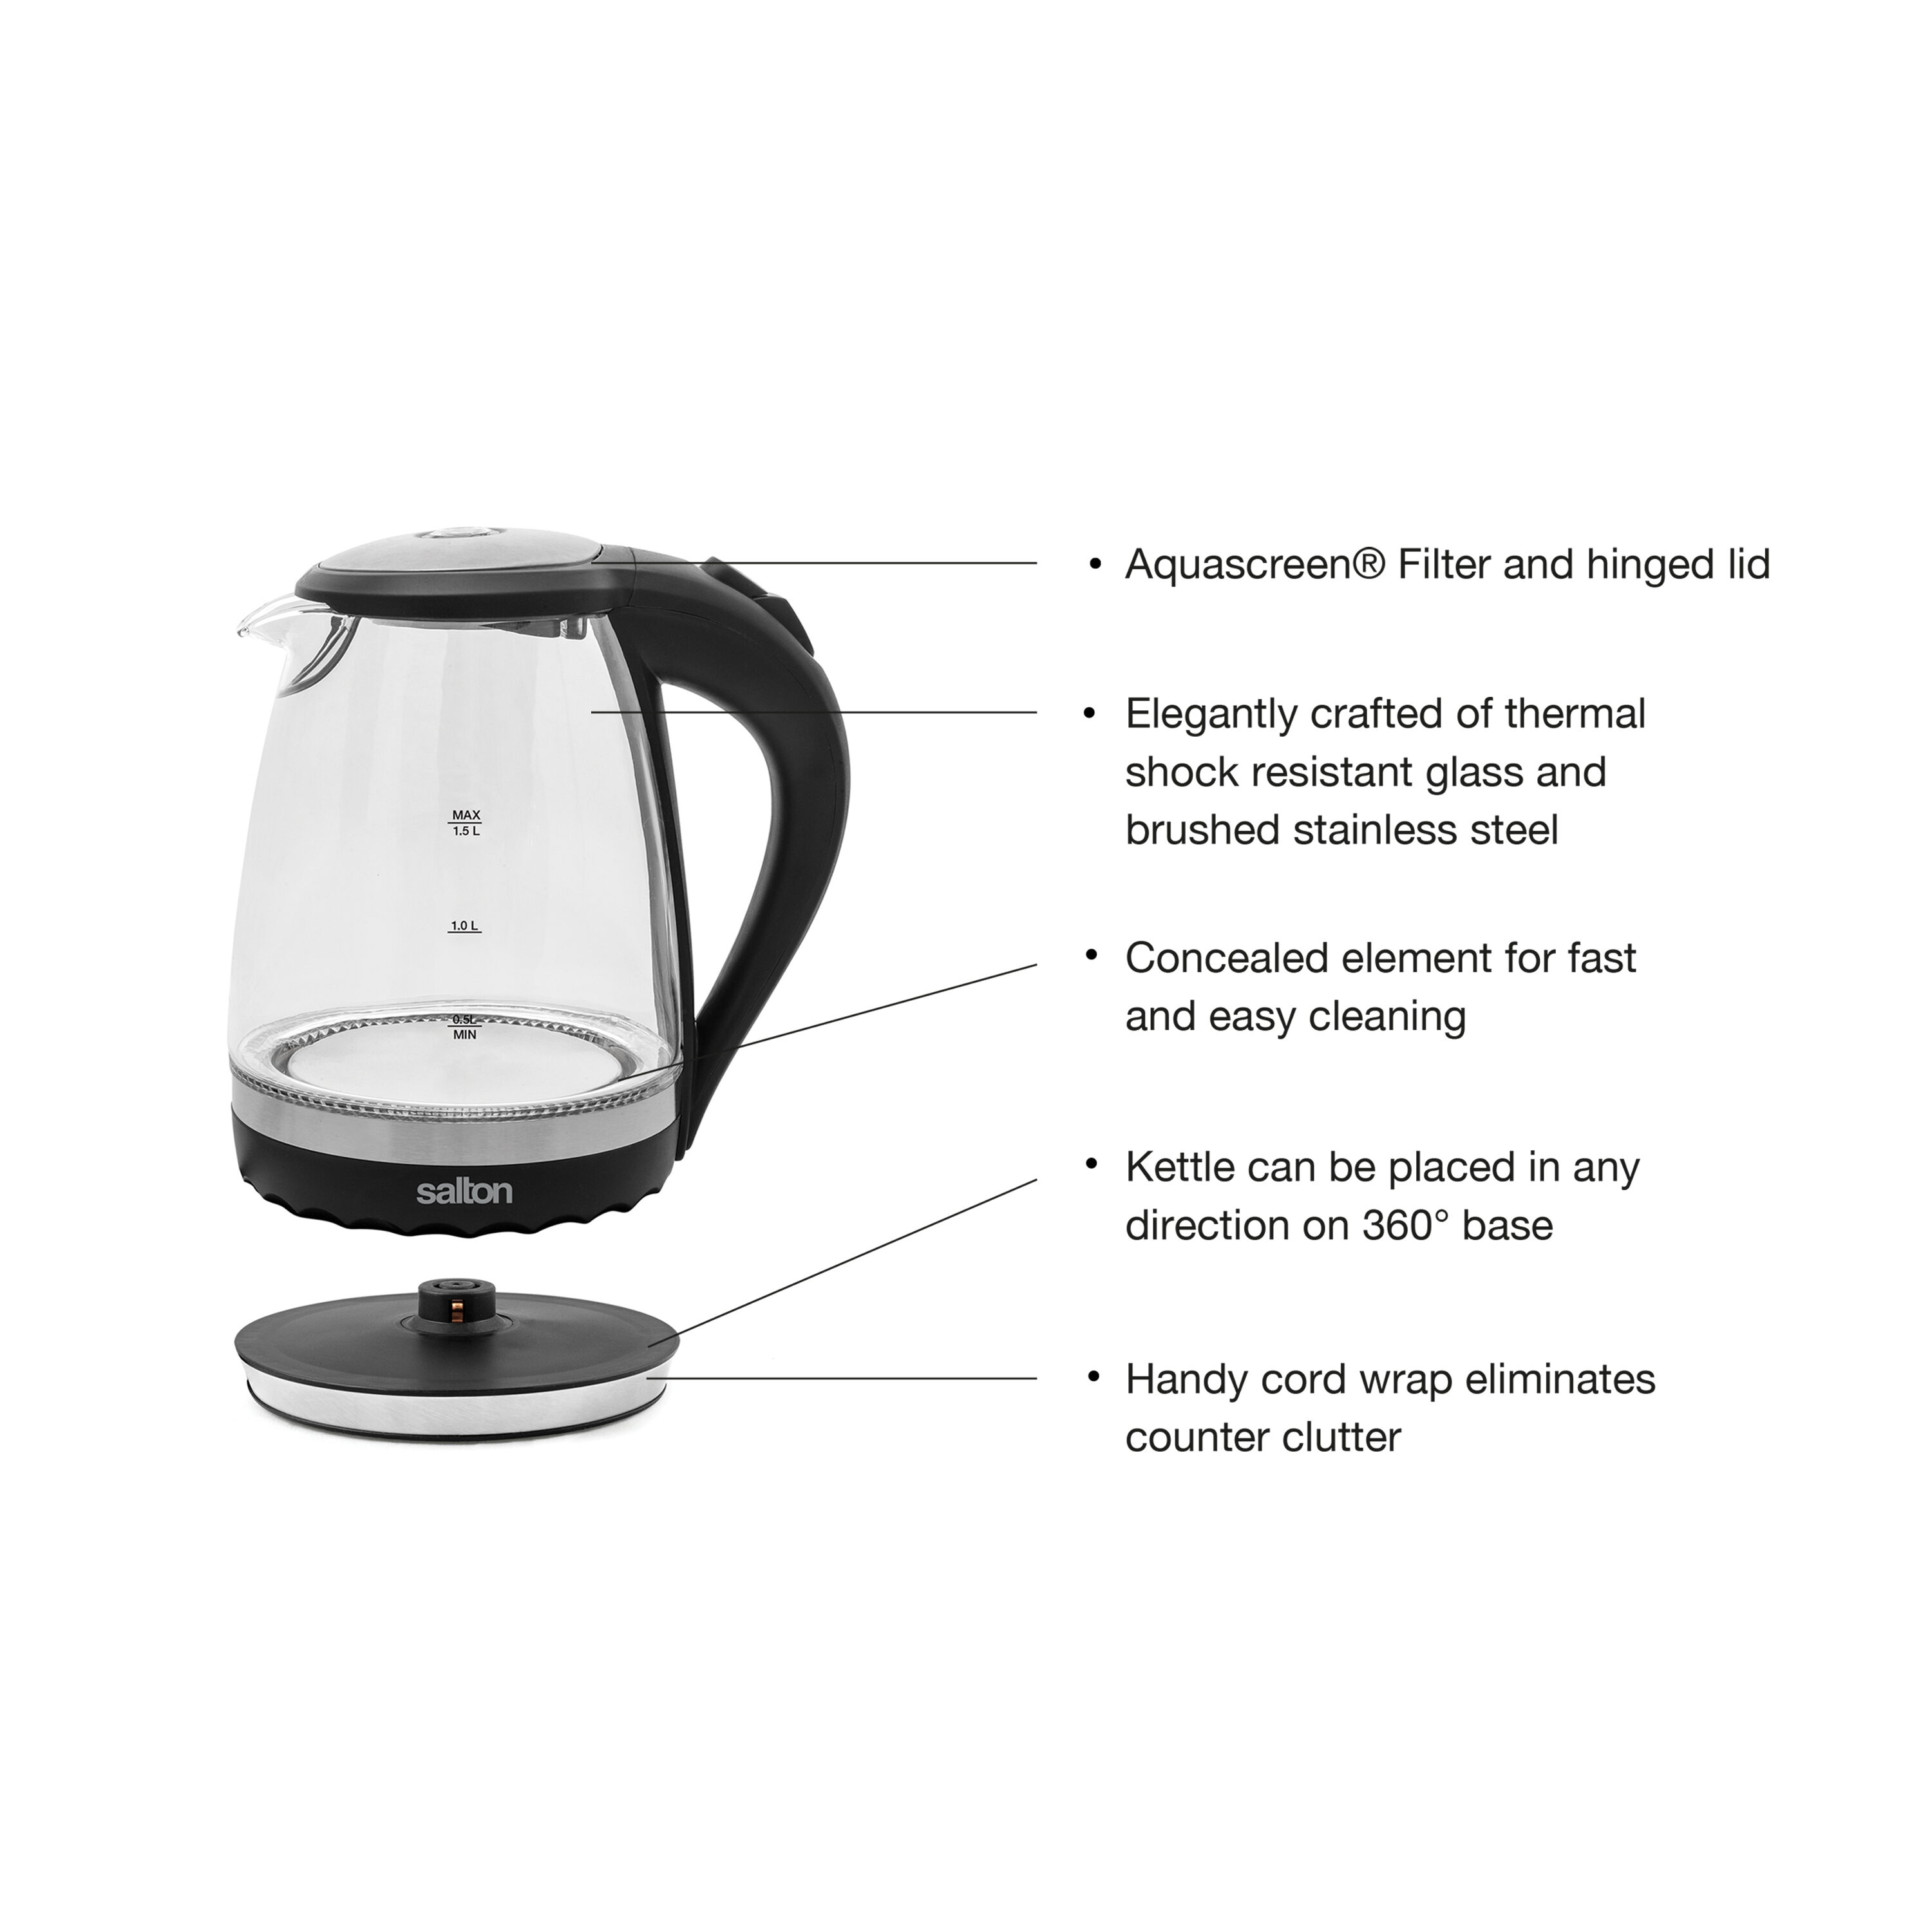 Portable 0.8L Cute Electric Kettle For Health And Wellness Multi